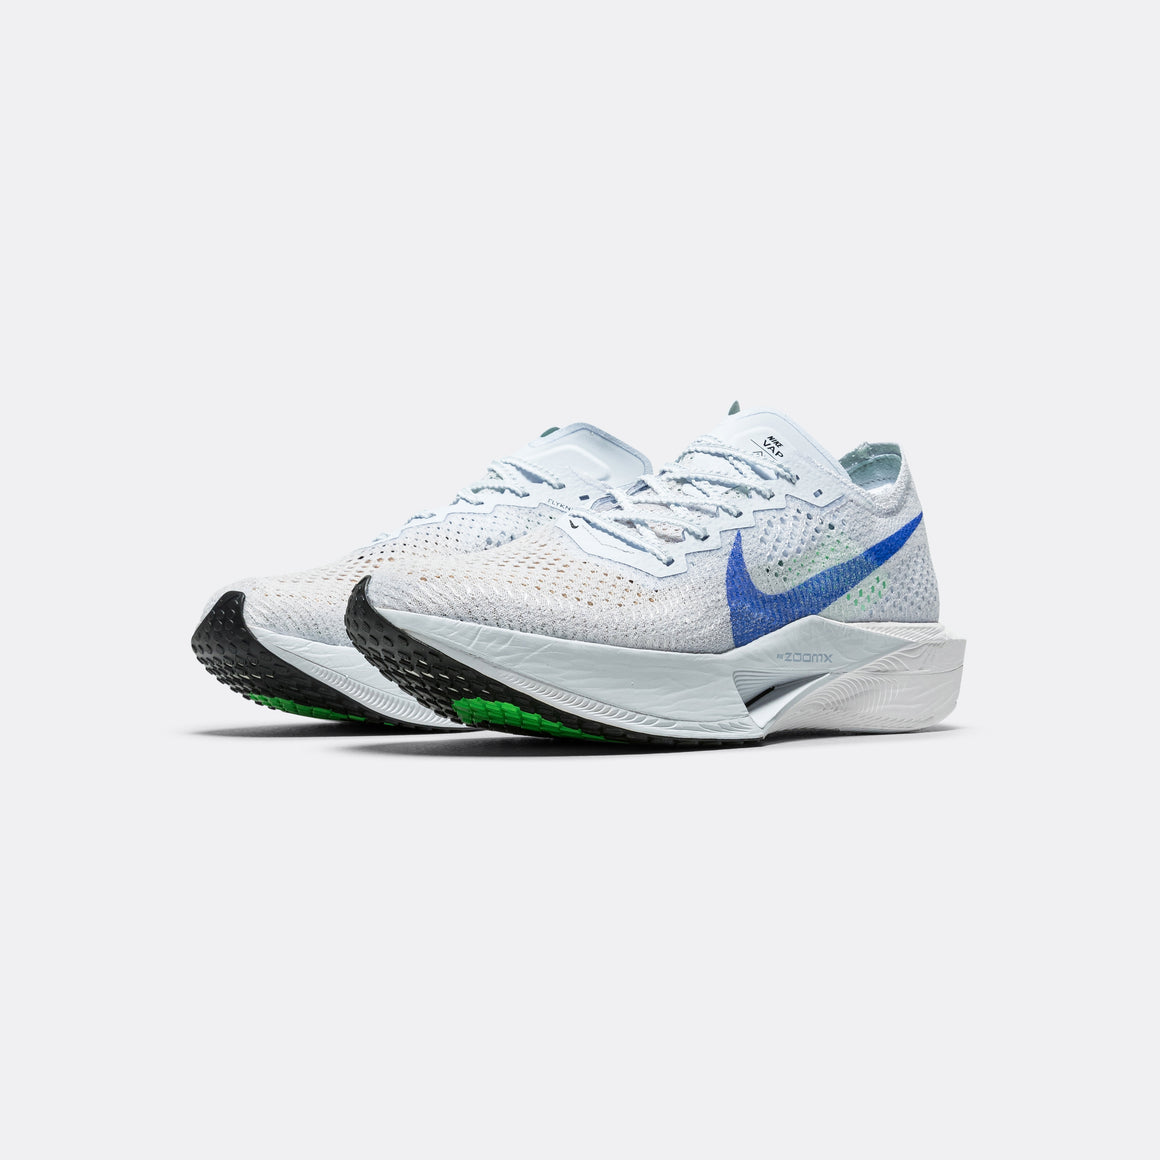 Nike - Mens ZoomX Vaporfly Next% 3 - Football Grey/Racer Blue-Green Strike - Up There Athletics